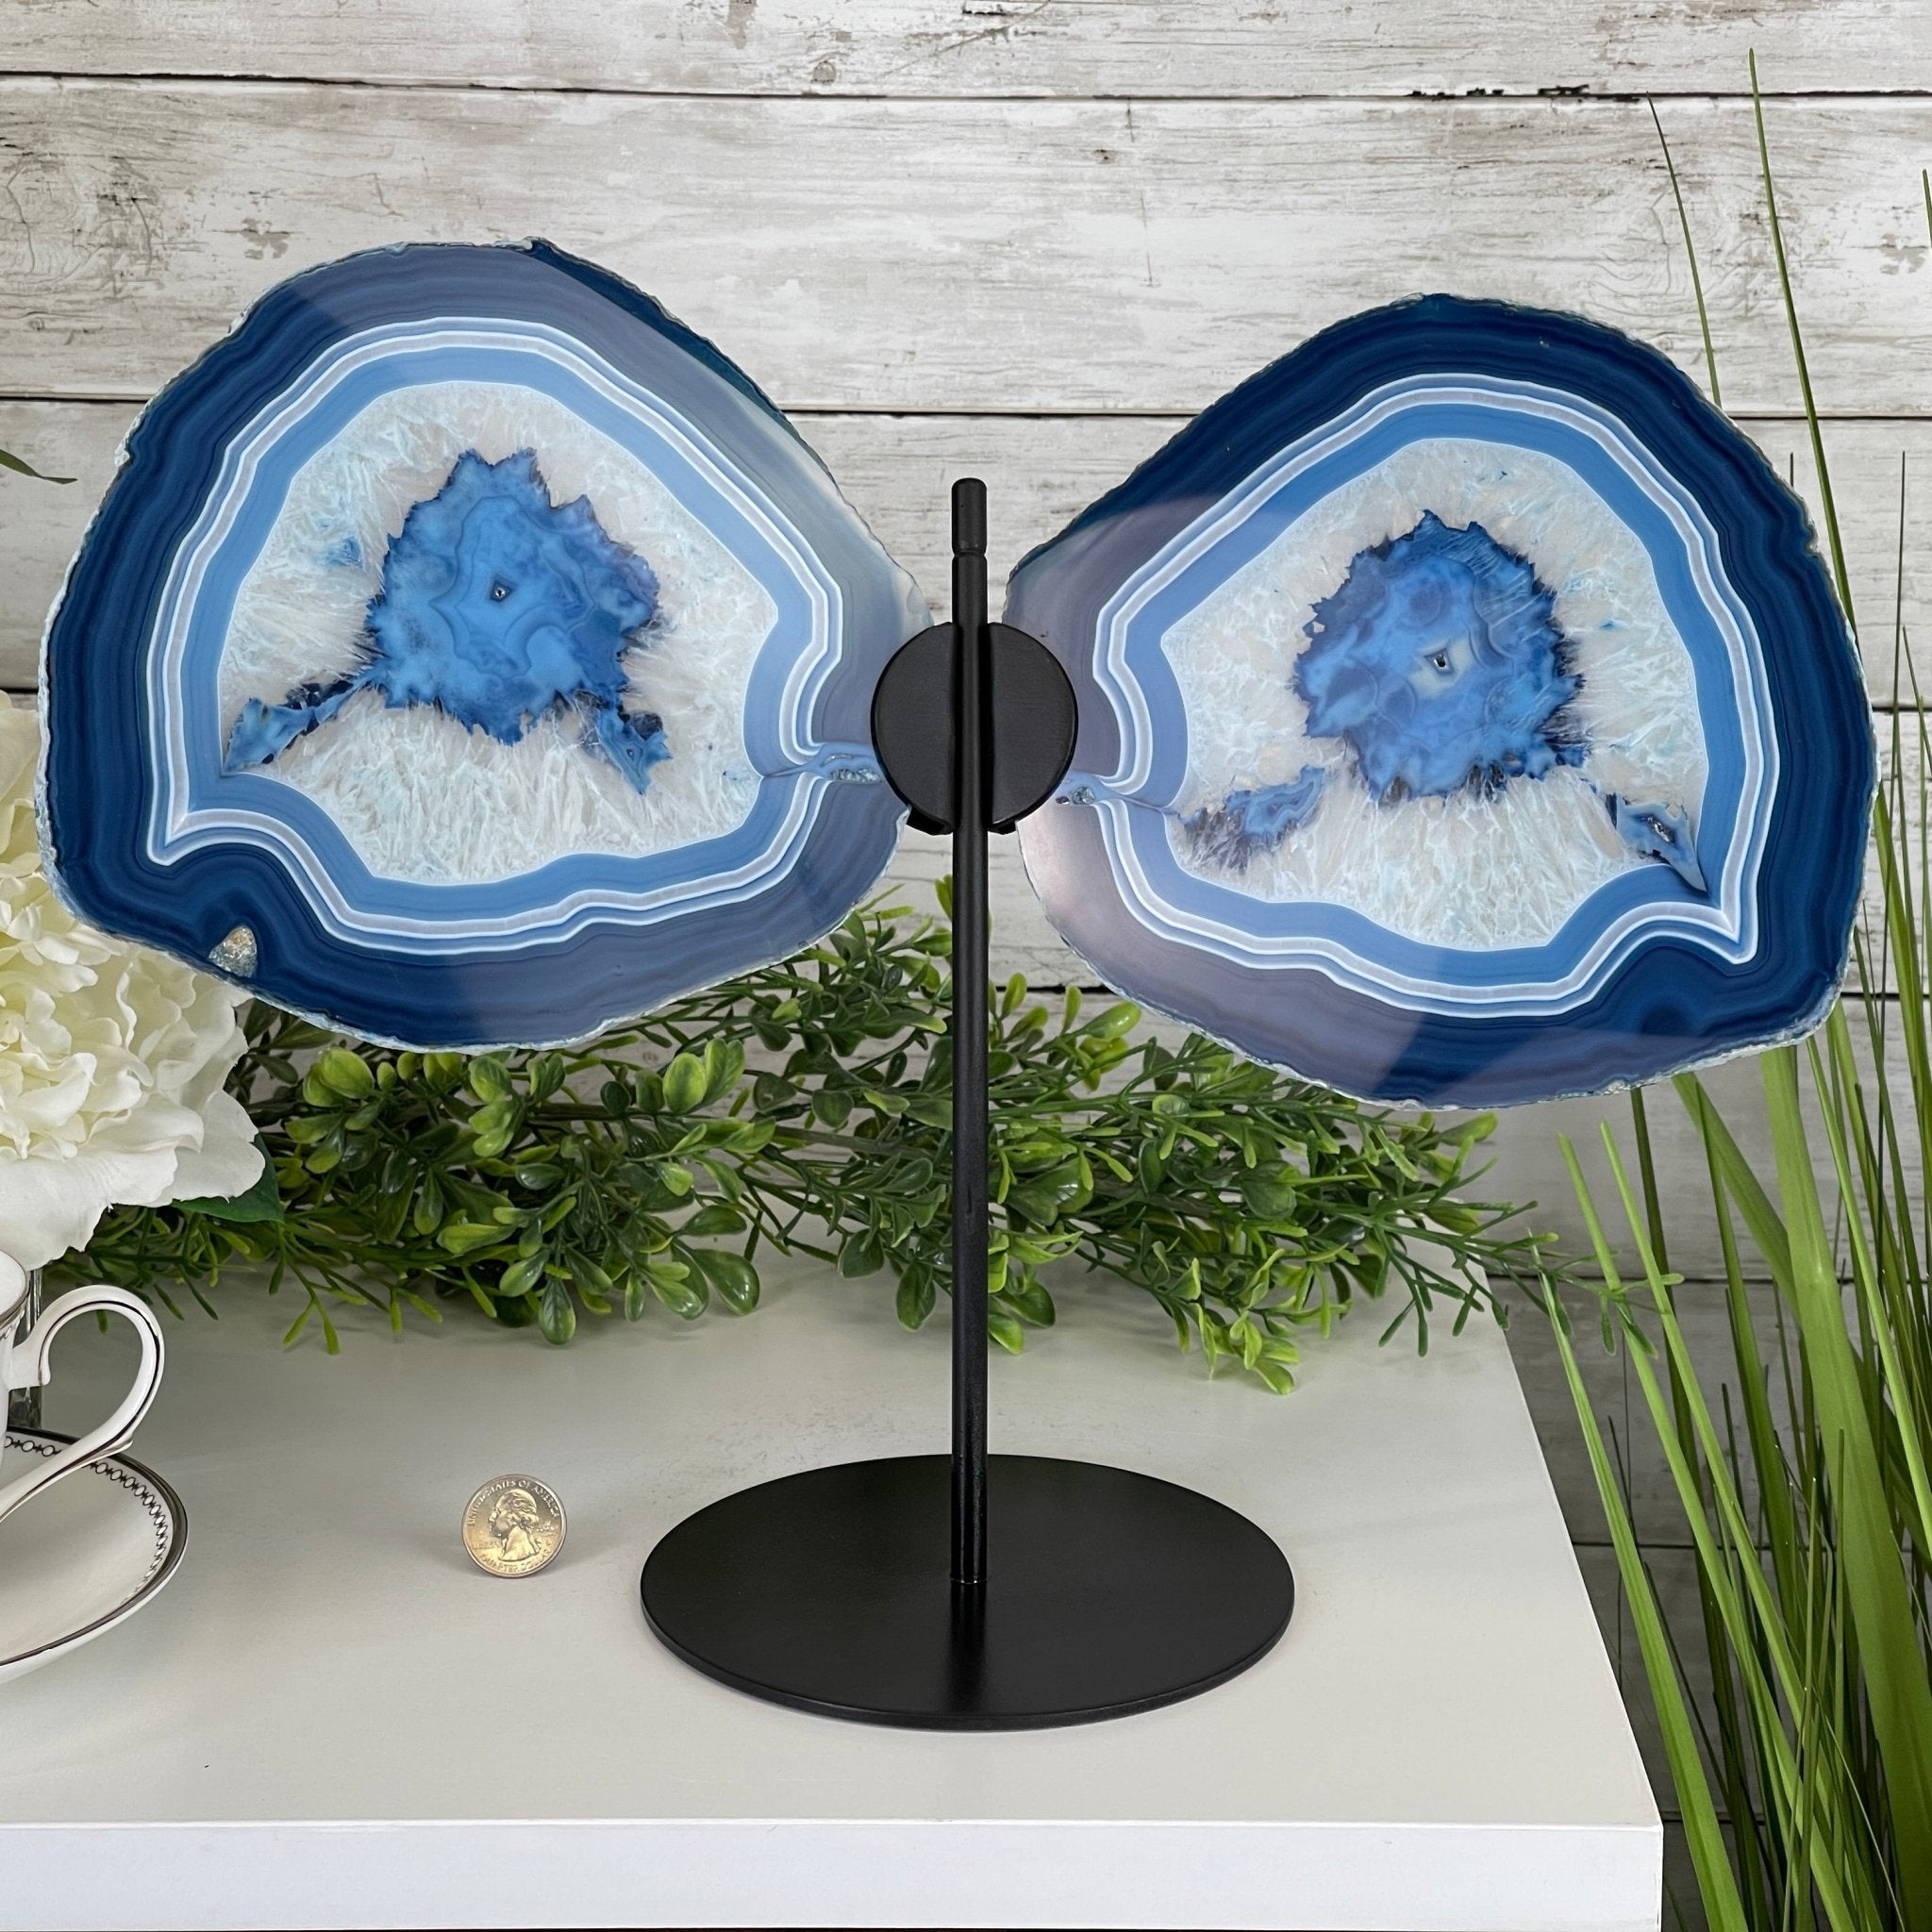 Large Dyed Blue Brazilian Agate "Butterfly Wings", Metal Stand, 12" Tall, Model #5050BL-0045 by Brazil Gems - Brazil GemsBrazil GemsLarge Dyed Blue Brazilian Agate "Butterfly Wings", Metal Stand, 12" Tall, Model #5050BL-0045 by Brazil GemsAgate Butterfly Wings5050BL-0045